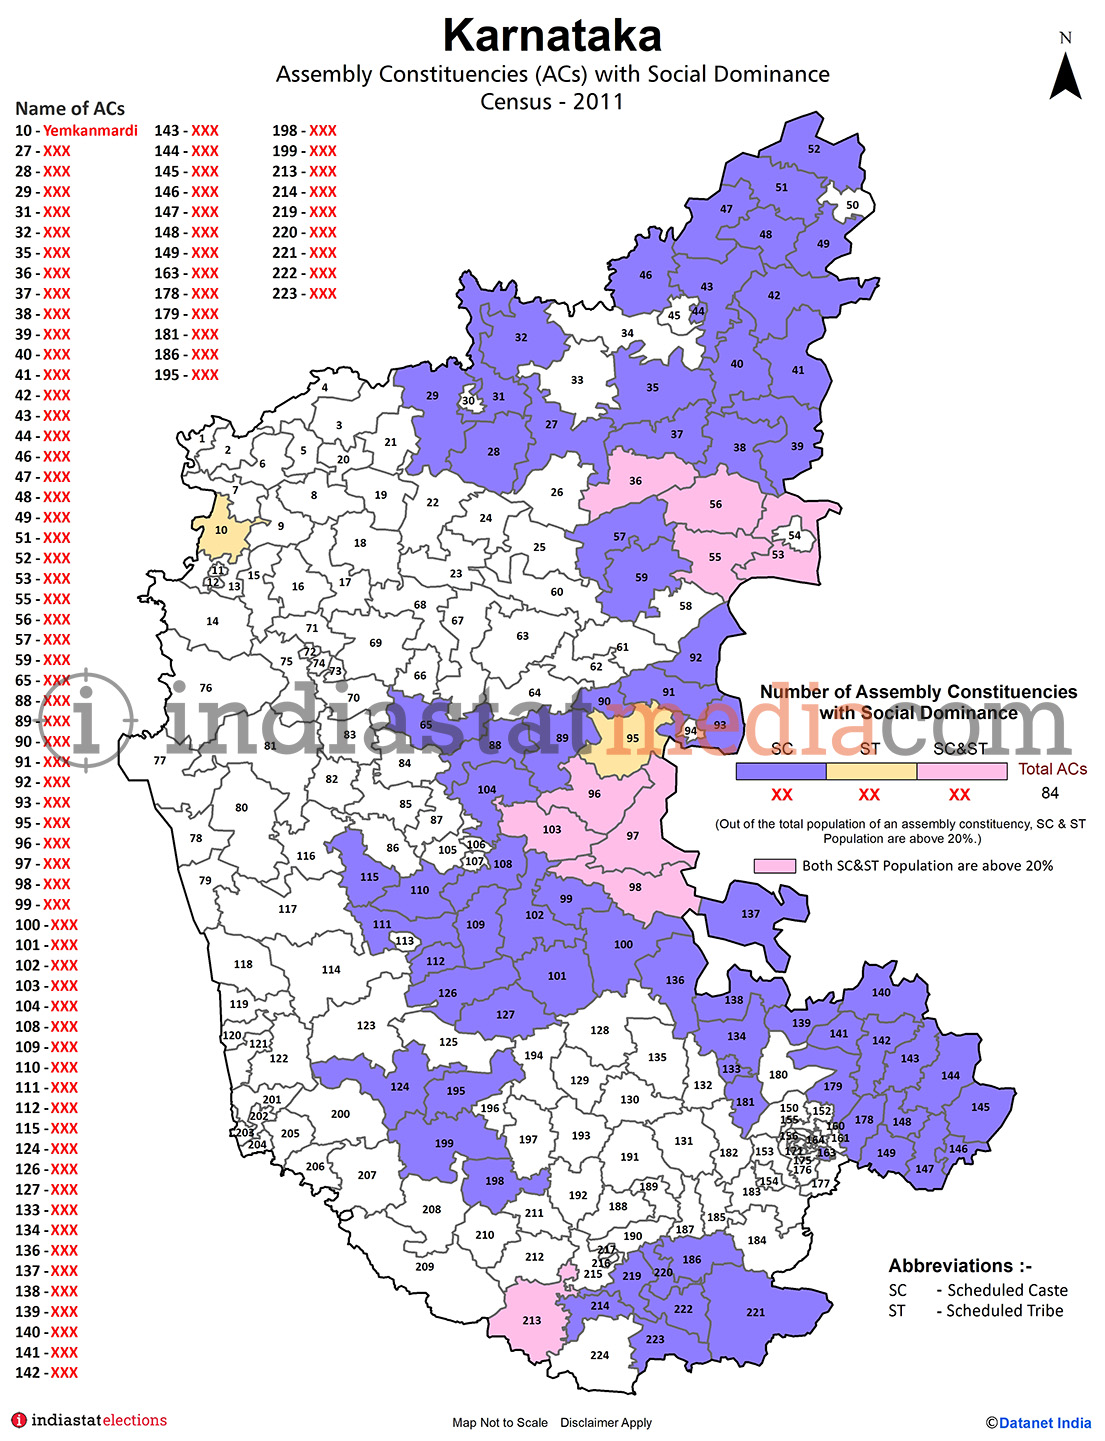 Assembly Constituencies with Social Dominance in Karnataka - Census 2011